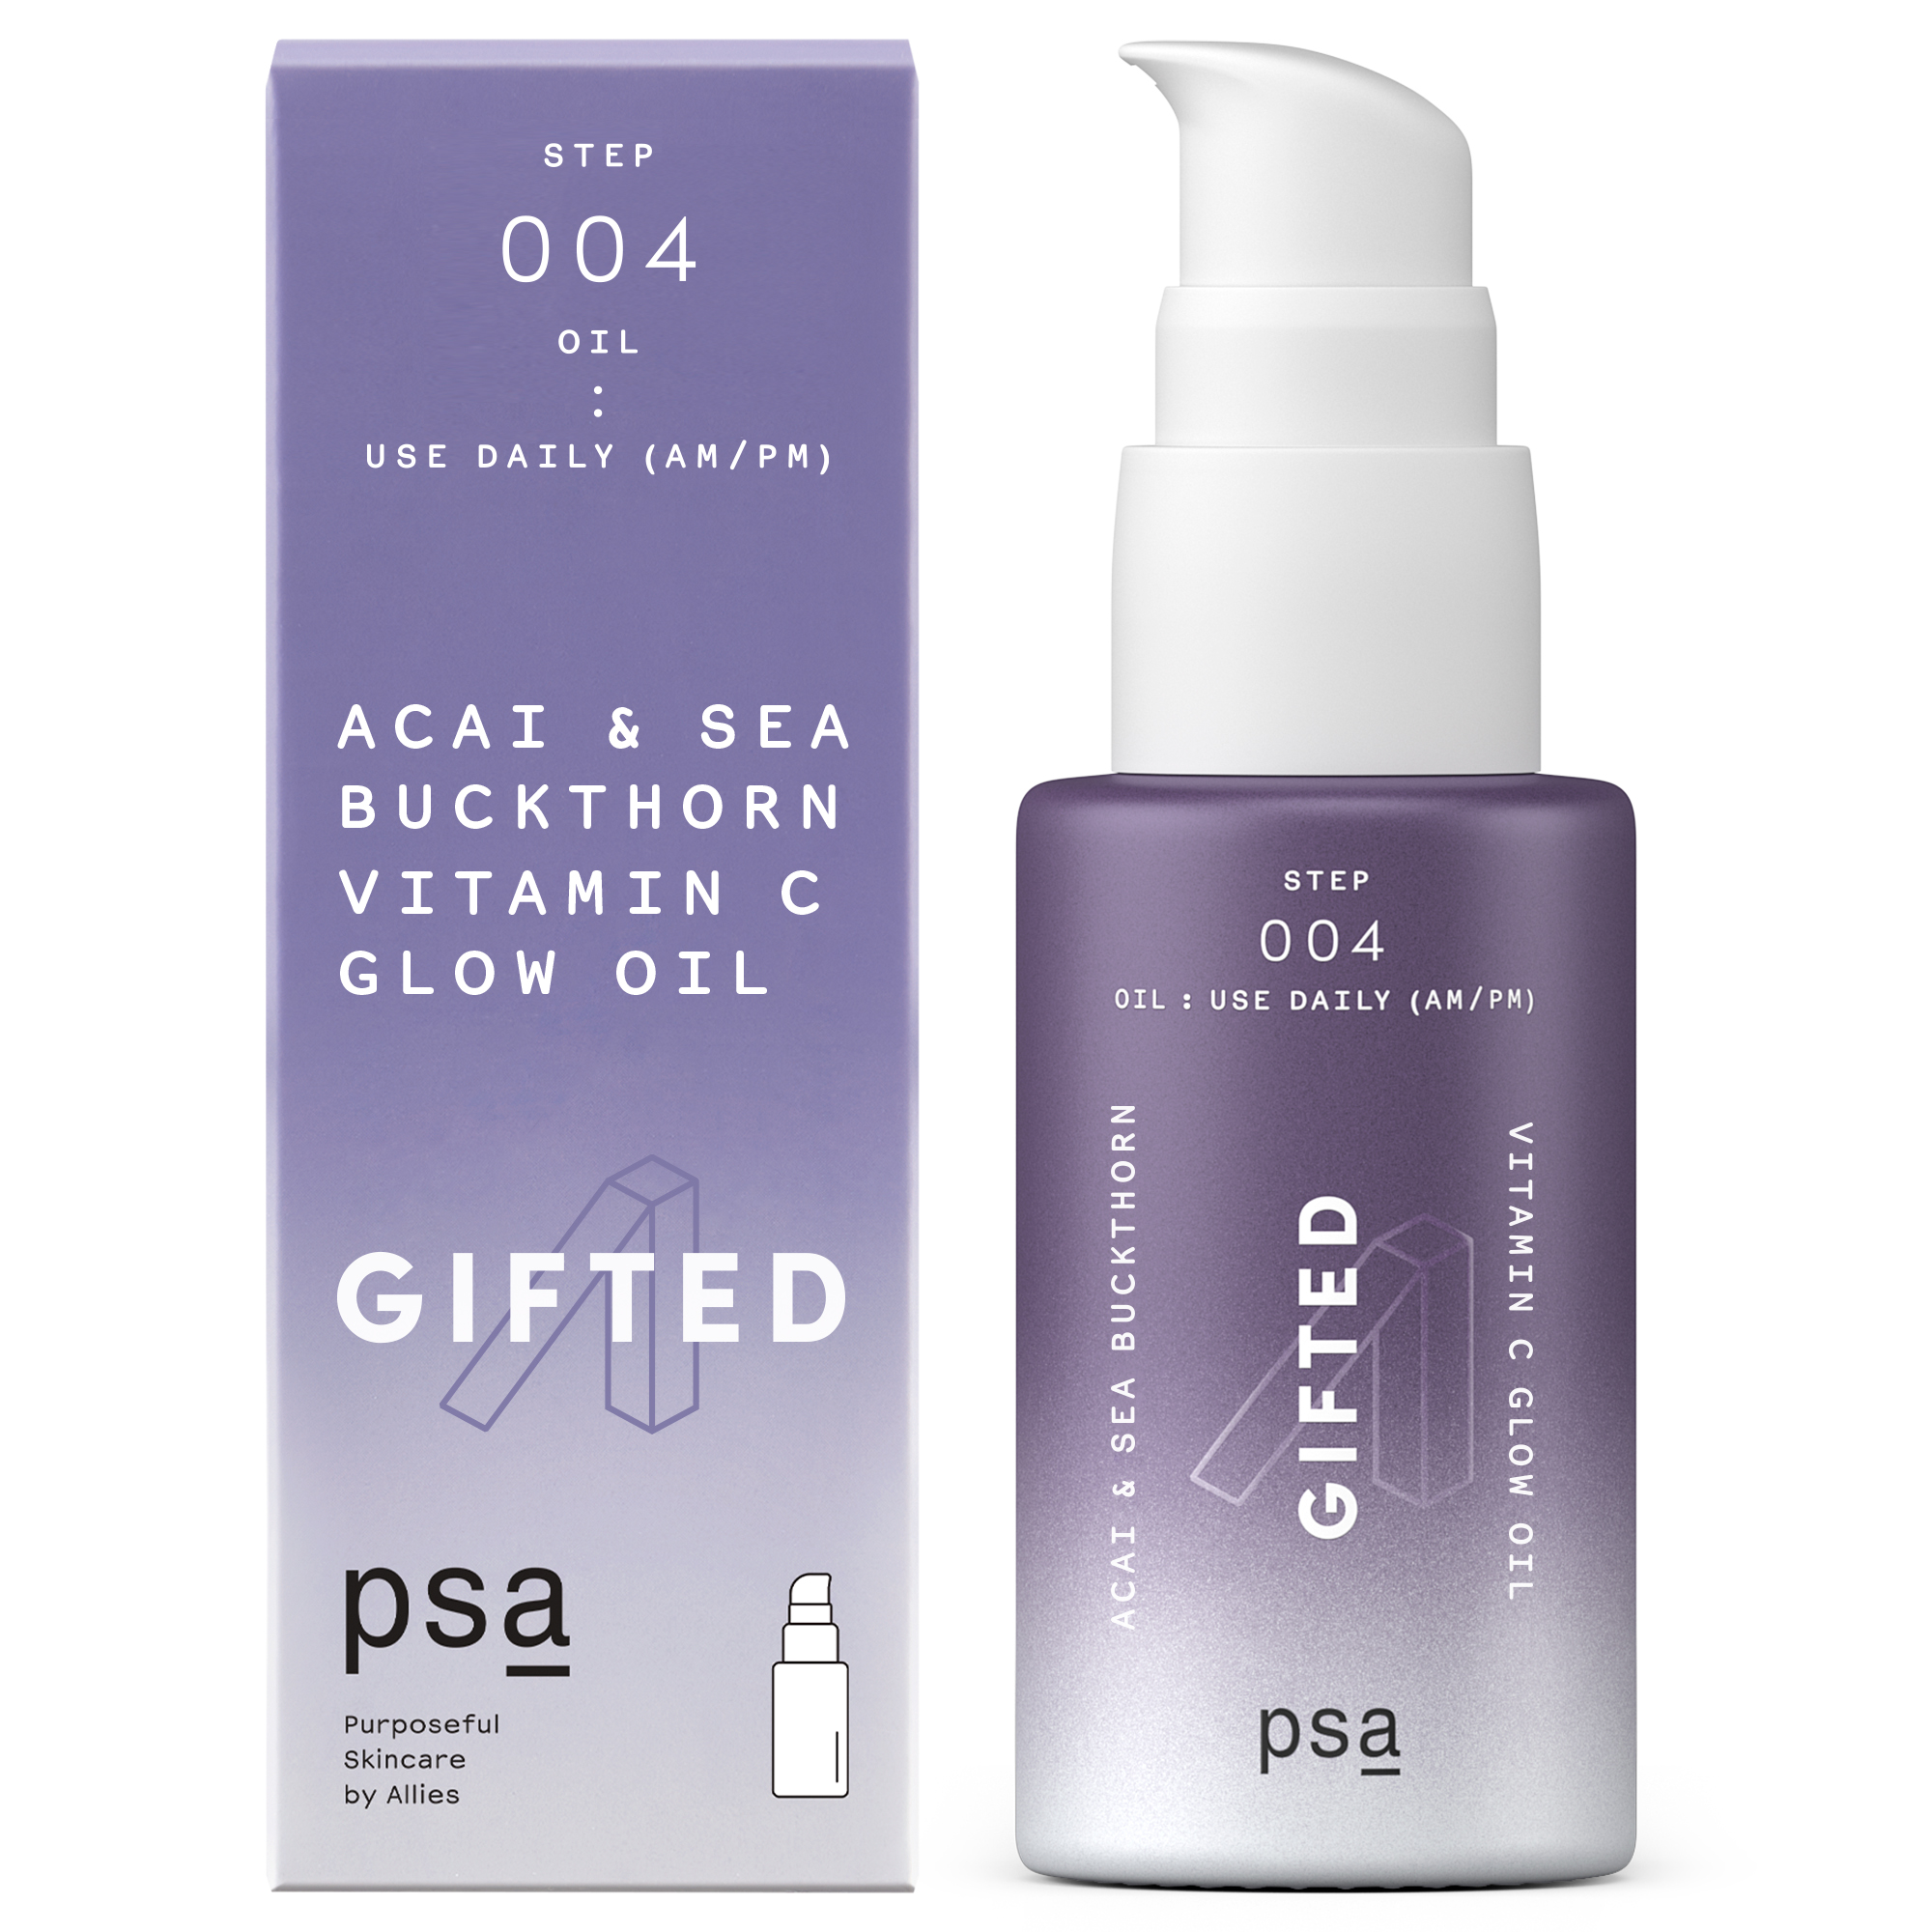 PSA GIFTED Acai and Sea Buckthorn Vitamin C Glow Oil, For All Skin Types, 0.5 fl oz/15 ml, Vegan - image 1 of 11